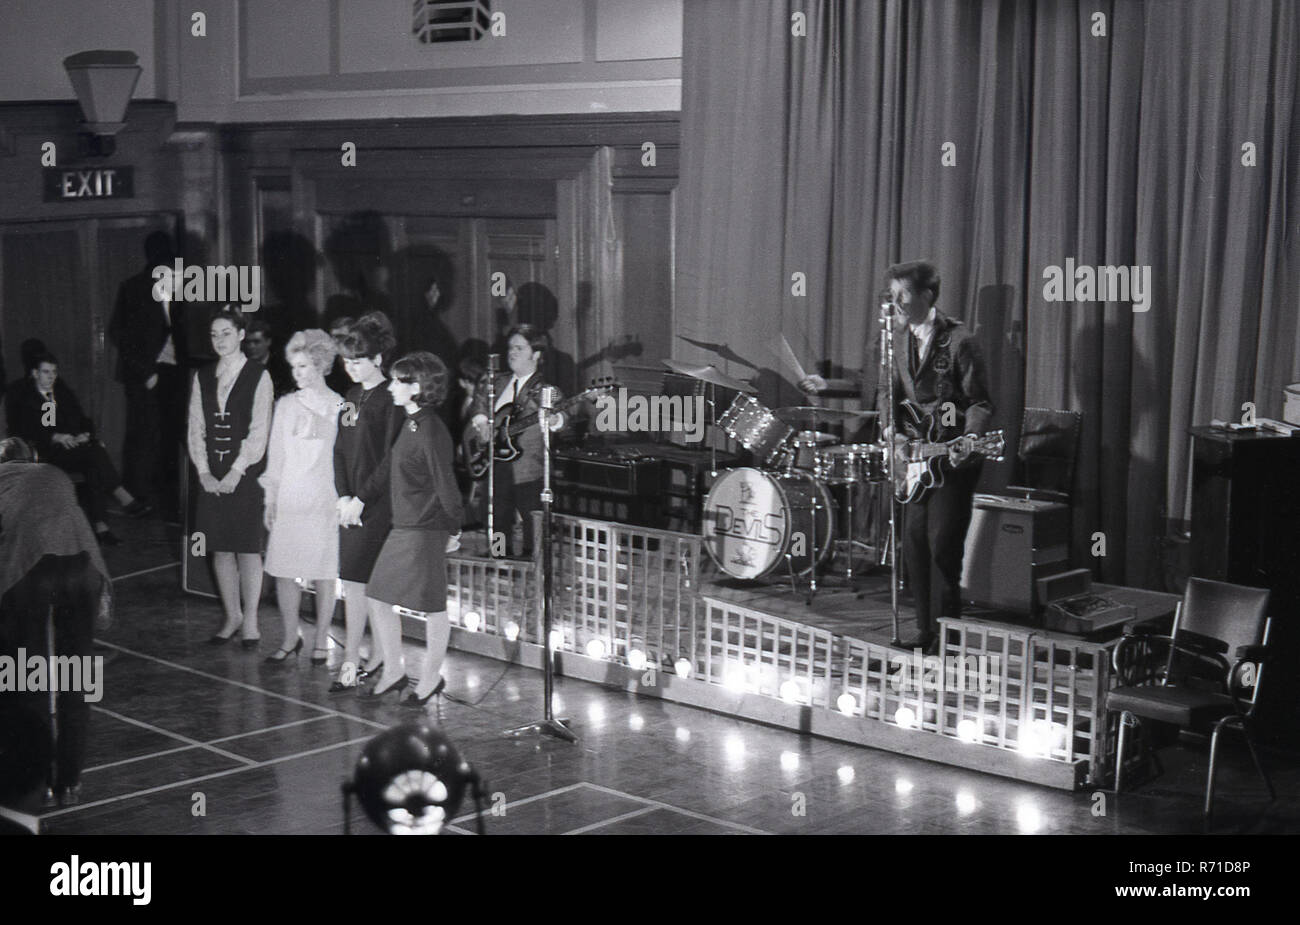 1960s, historical, music audition, young women having an audition as a singer, England, UK> Stock Photo